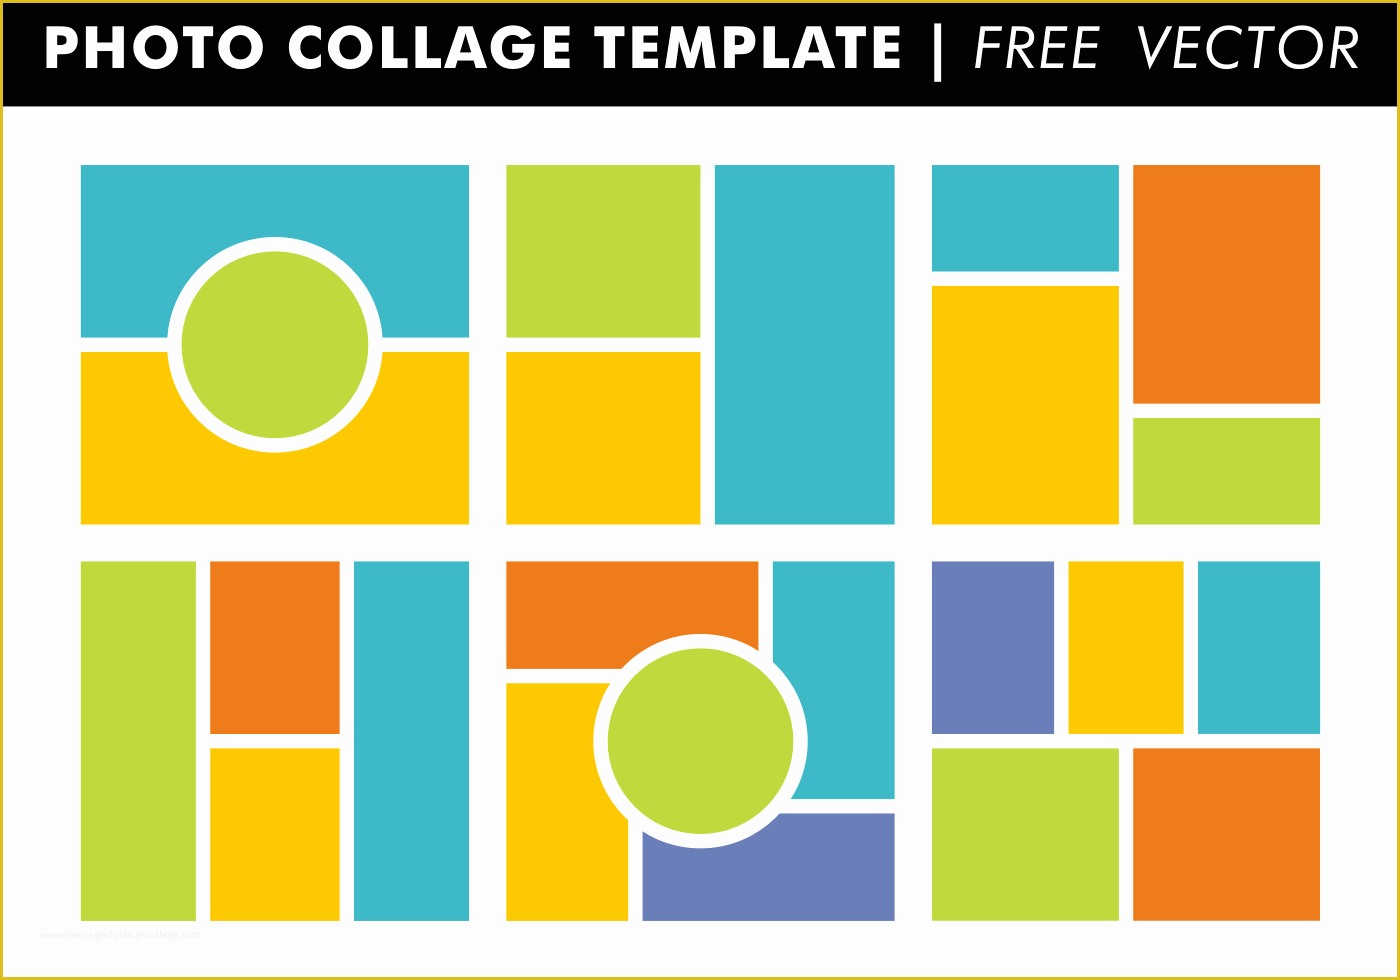 Free Photoshop Collage Templates Of Collage Templates Vector Download Free Vector Art